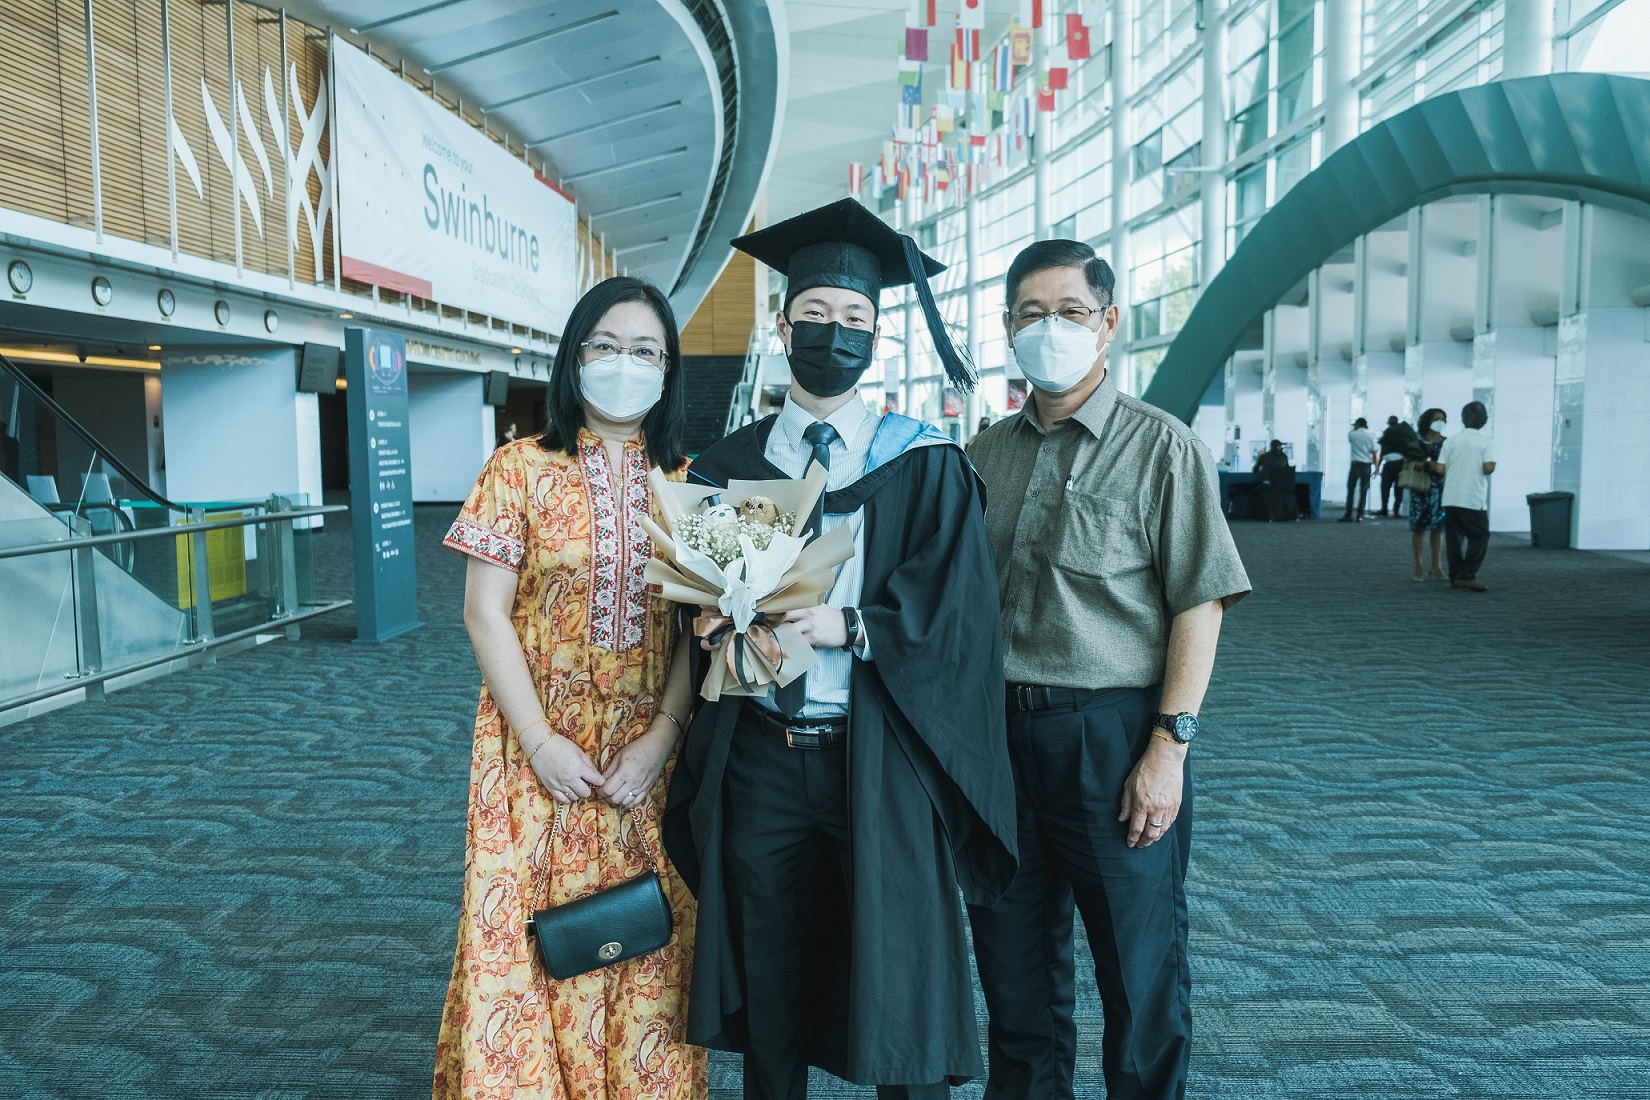 Valedictorian Lai Chung Yi (centre) with his parents.